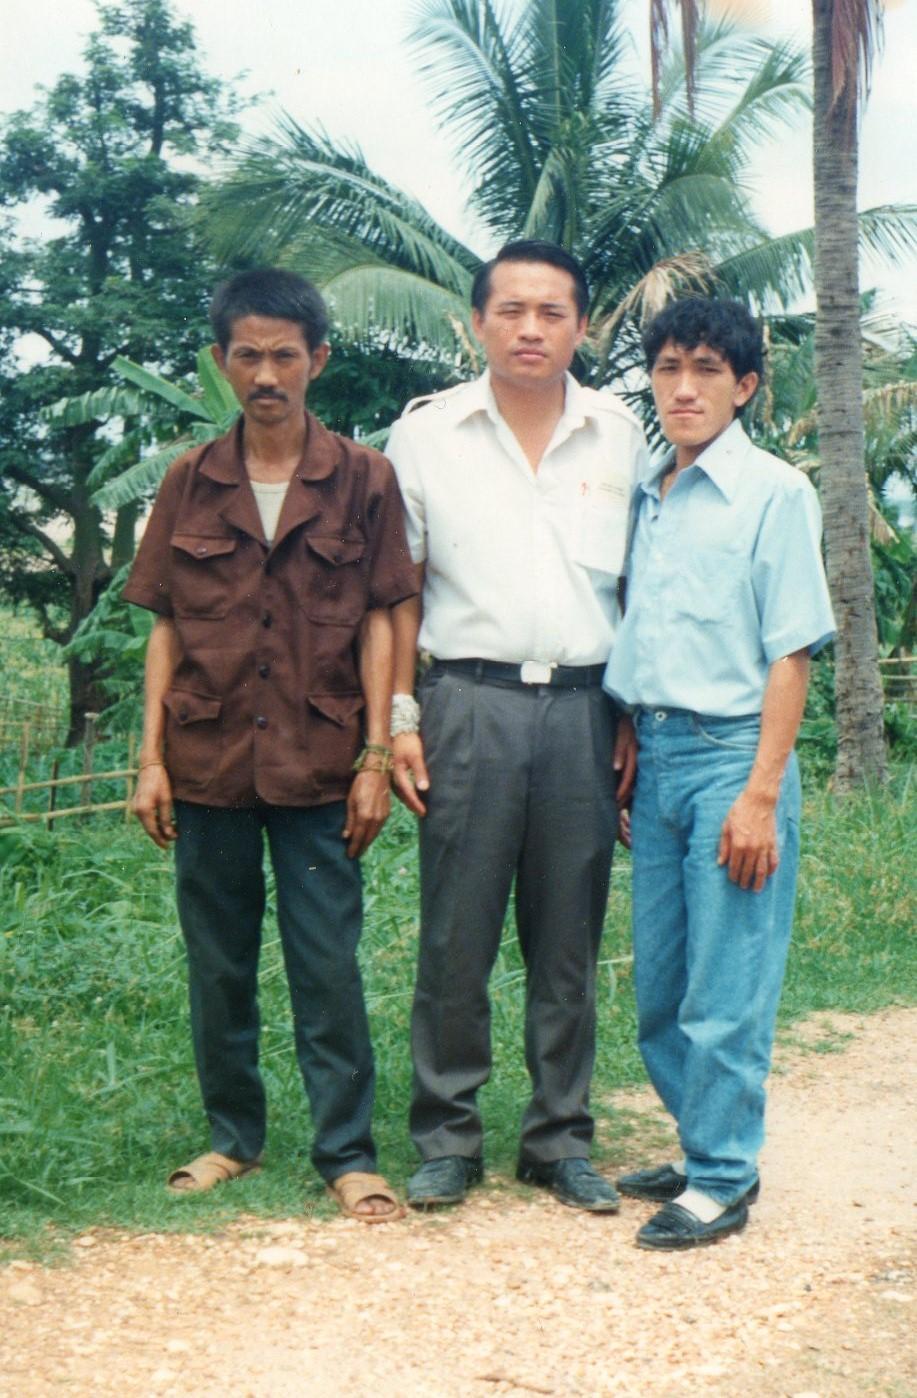 From left to right: Boua Hae Yang, Terry Tong Ger Yang, and Moua Pao Yang,